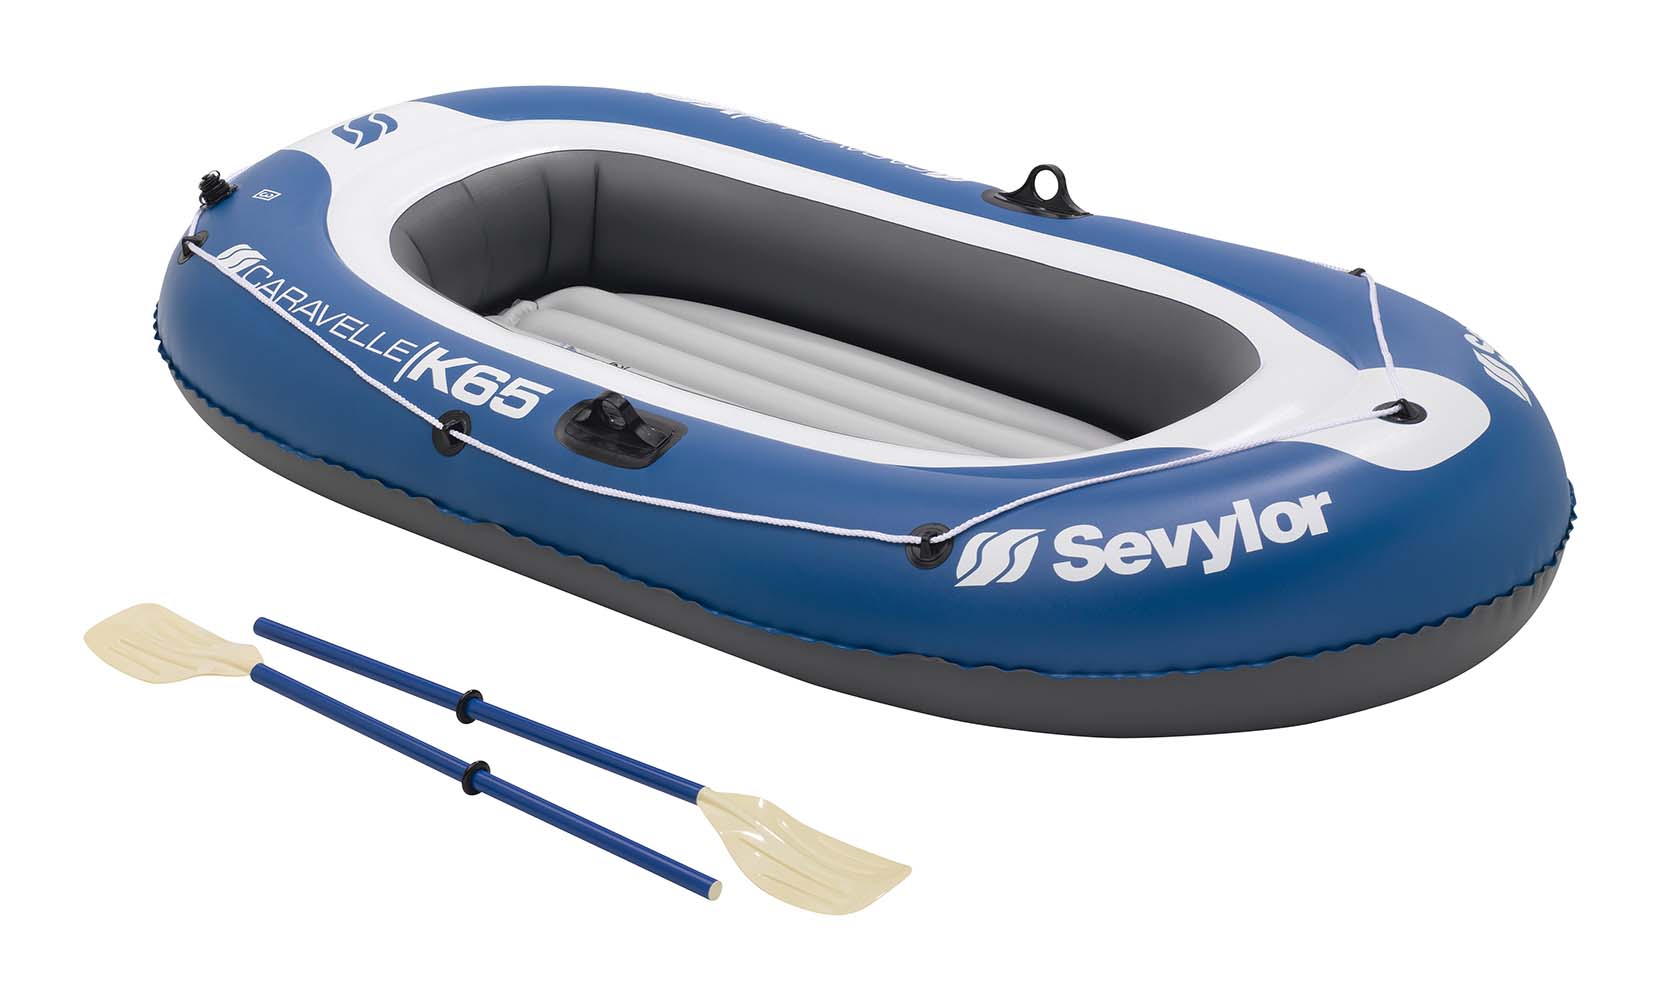 3704734 A sturdy inflatable boat. This boat is exceptionally suitable for 2 persons. Made from extra thick PVC for high durability. This inflatable boat has 1 large air chamber, 1 safety chamber and a built in test to measure the inflation. Can be transported very compact after use (LxWxH: 57x32.5x13.5 cm). Delivered with a repair kit, paddles and an inflating pump. Maximum load: 165 kilogram.